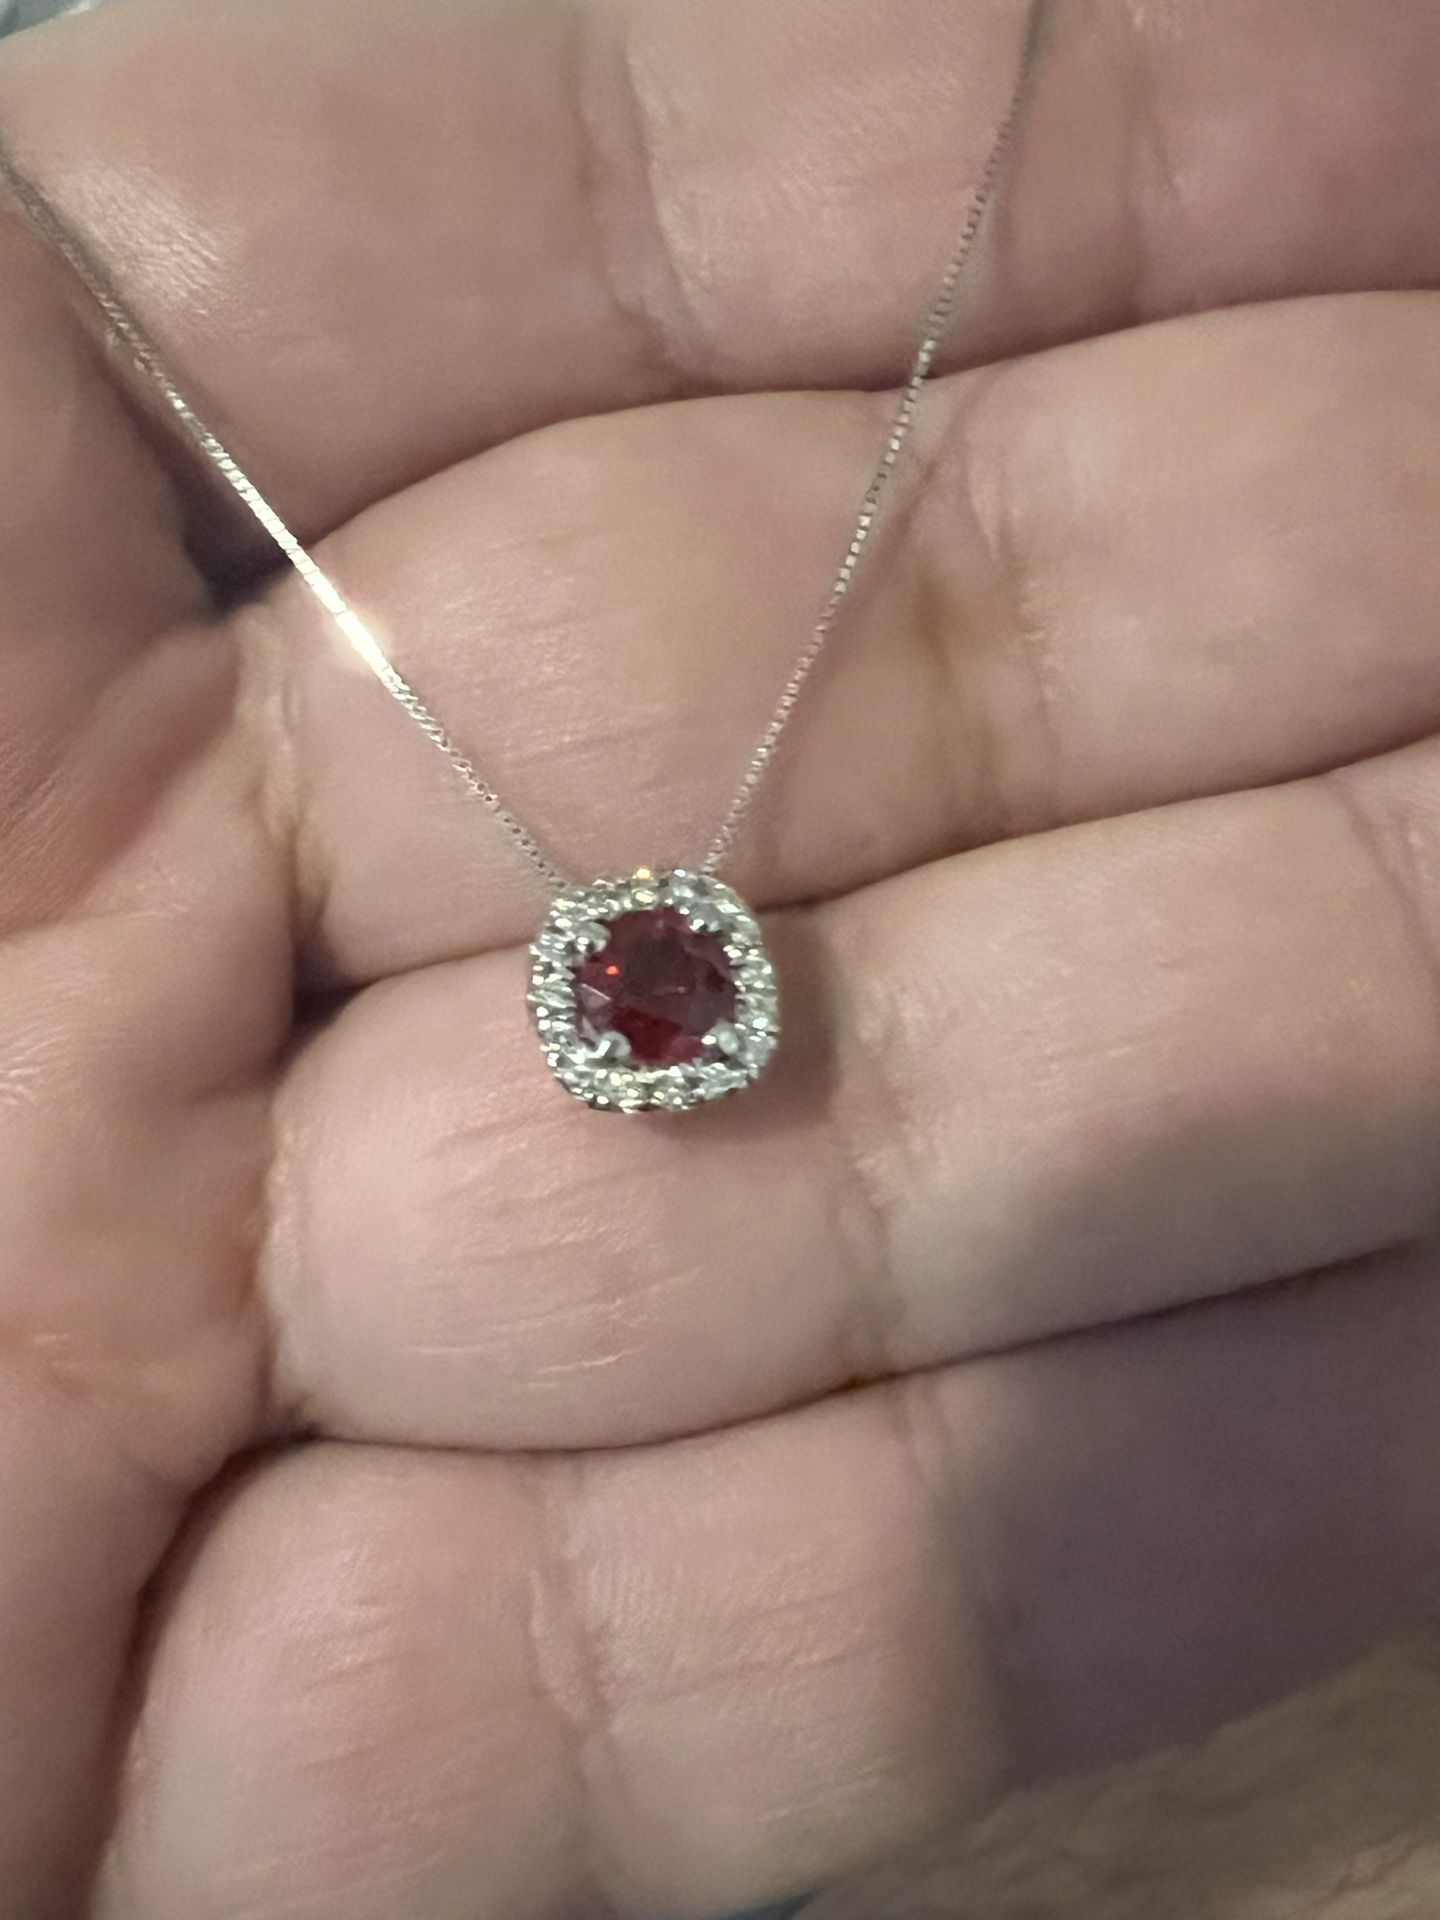 14k white gold diamond and red spinel necklace